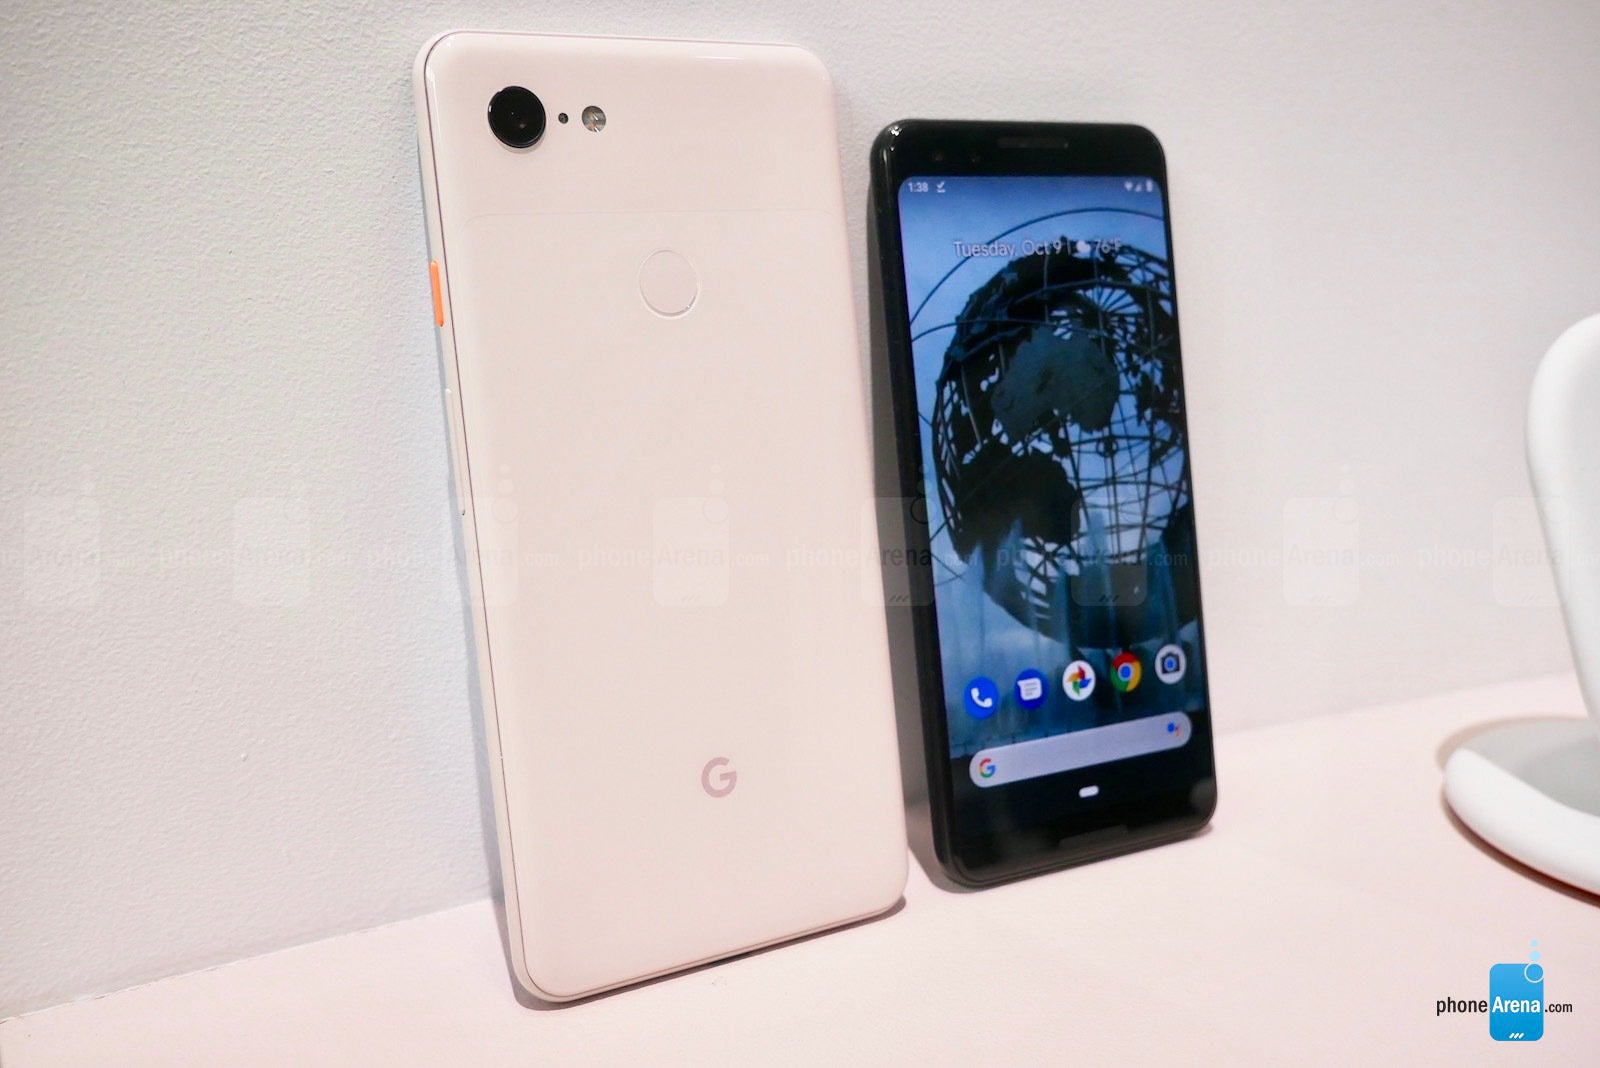 Google Pixel 3 and Pixel 3 XL Hands-On: Google doubles down on photography